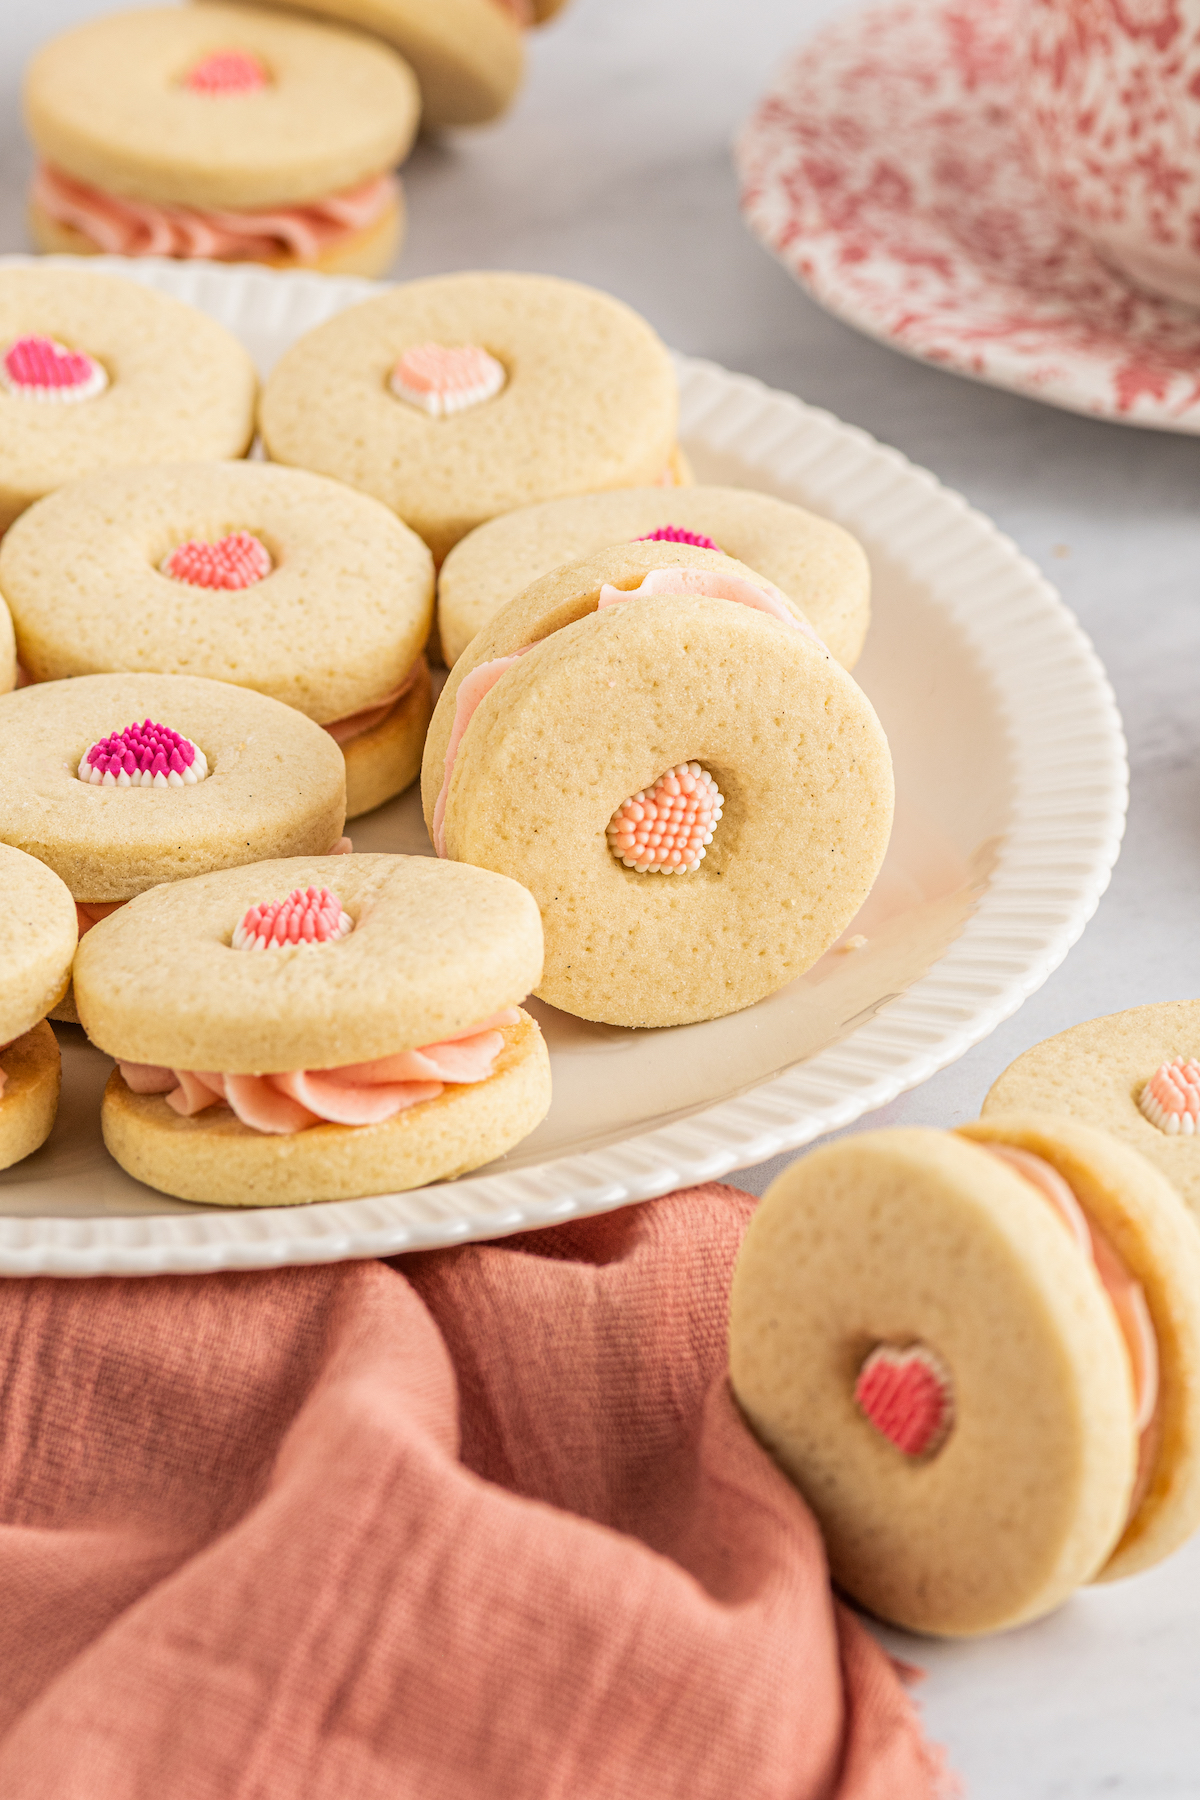 A white plate with vanilla sandwich cookies arranged on it in a single layer. A pink napkin and cookie are in the foreground of the shot.